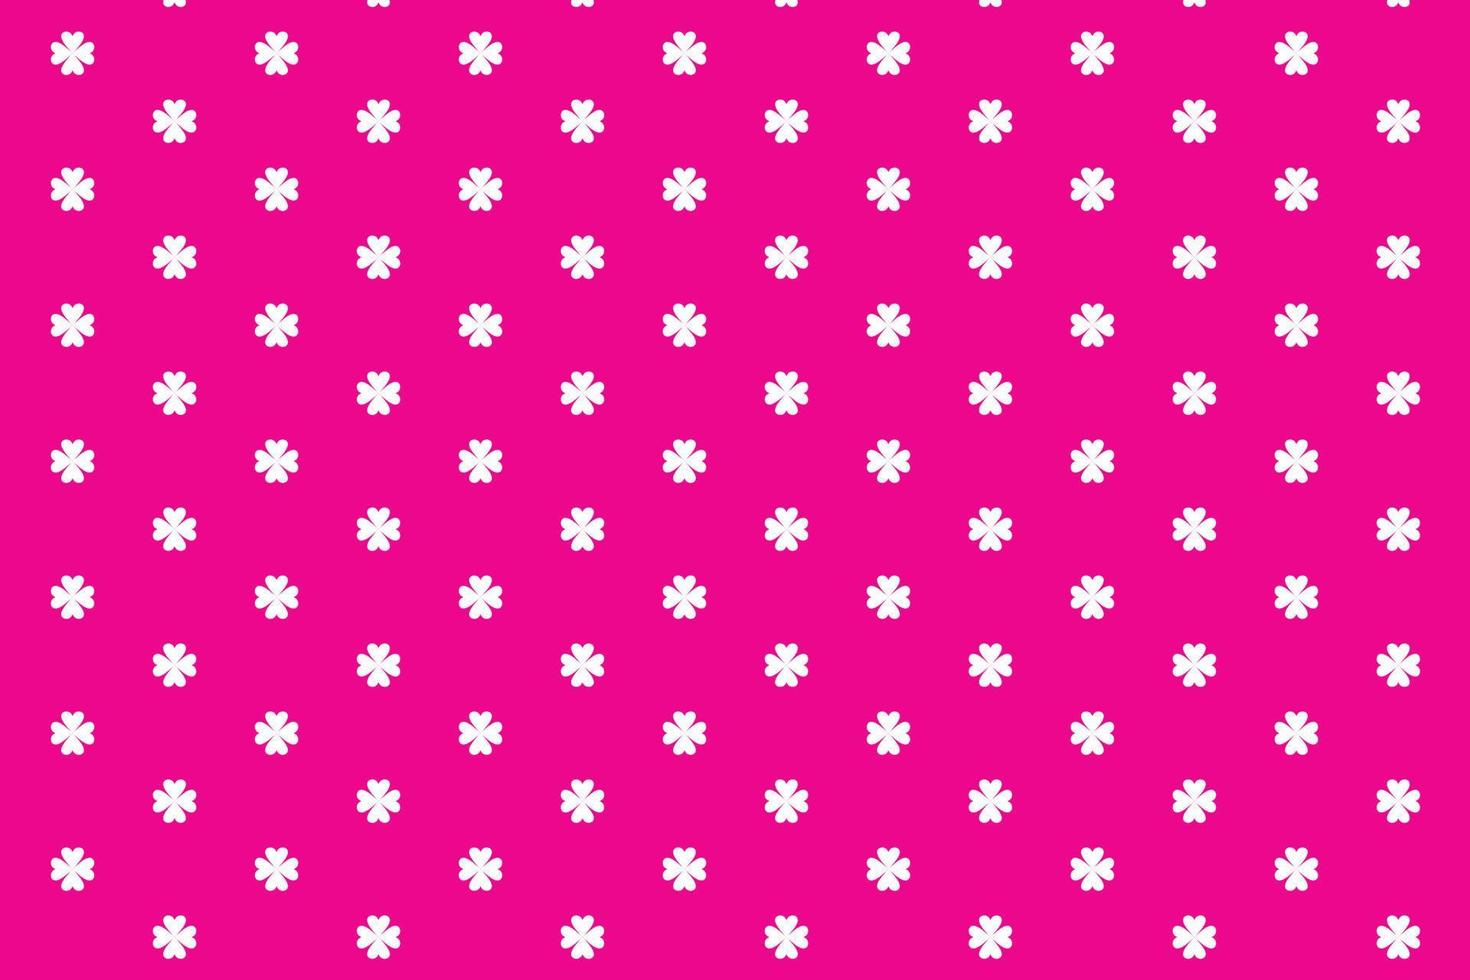 abstract seamless white flower with pink background pattern. vector